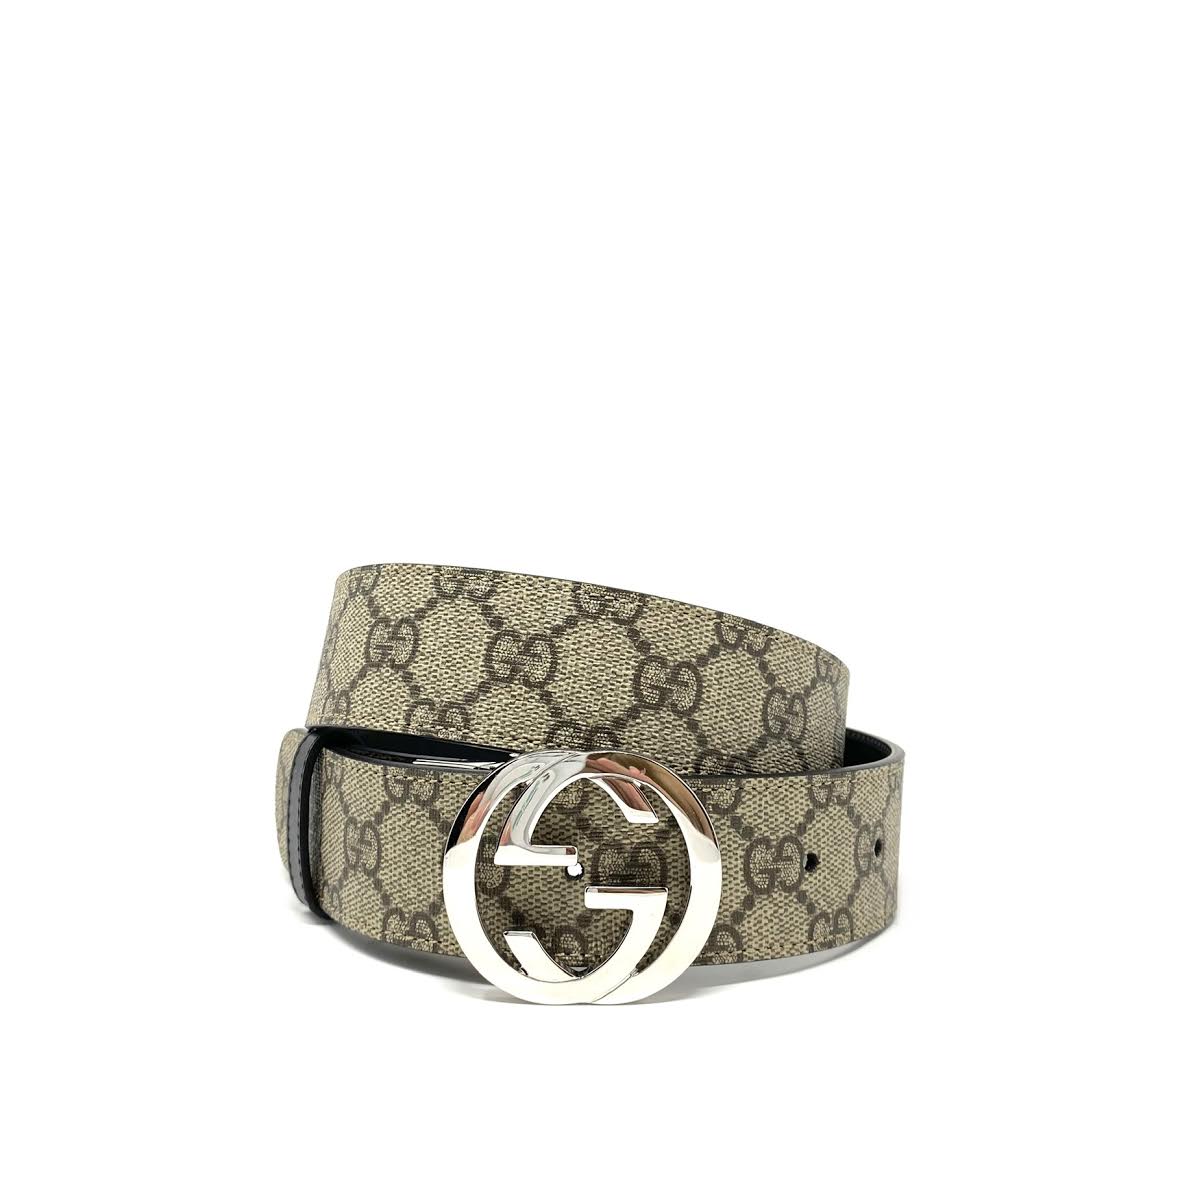 Gucci Reversible Supreme Leather Belt with GG Metal Buckle